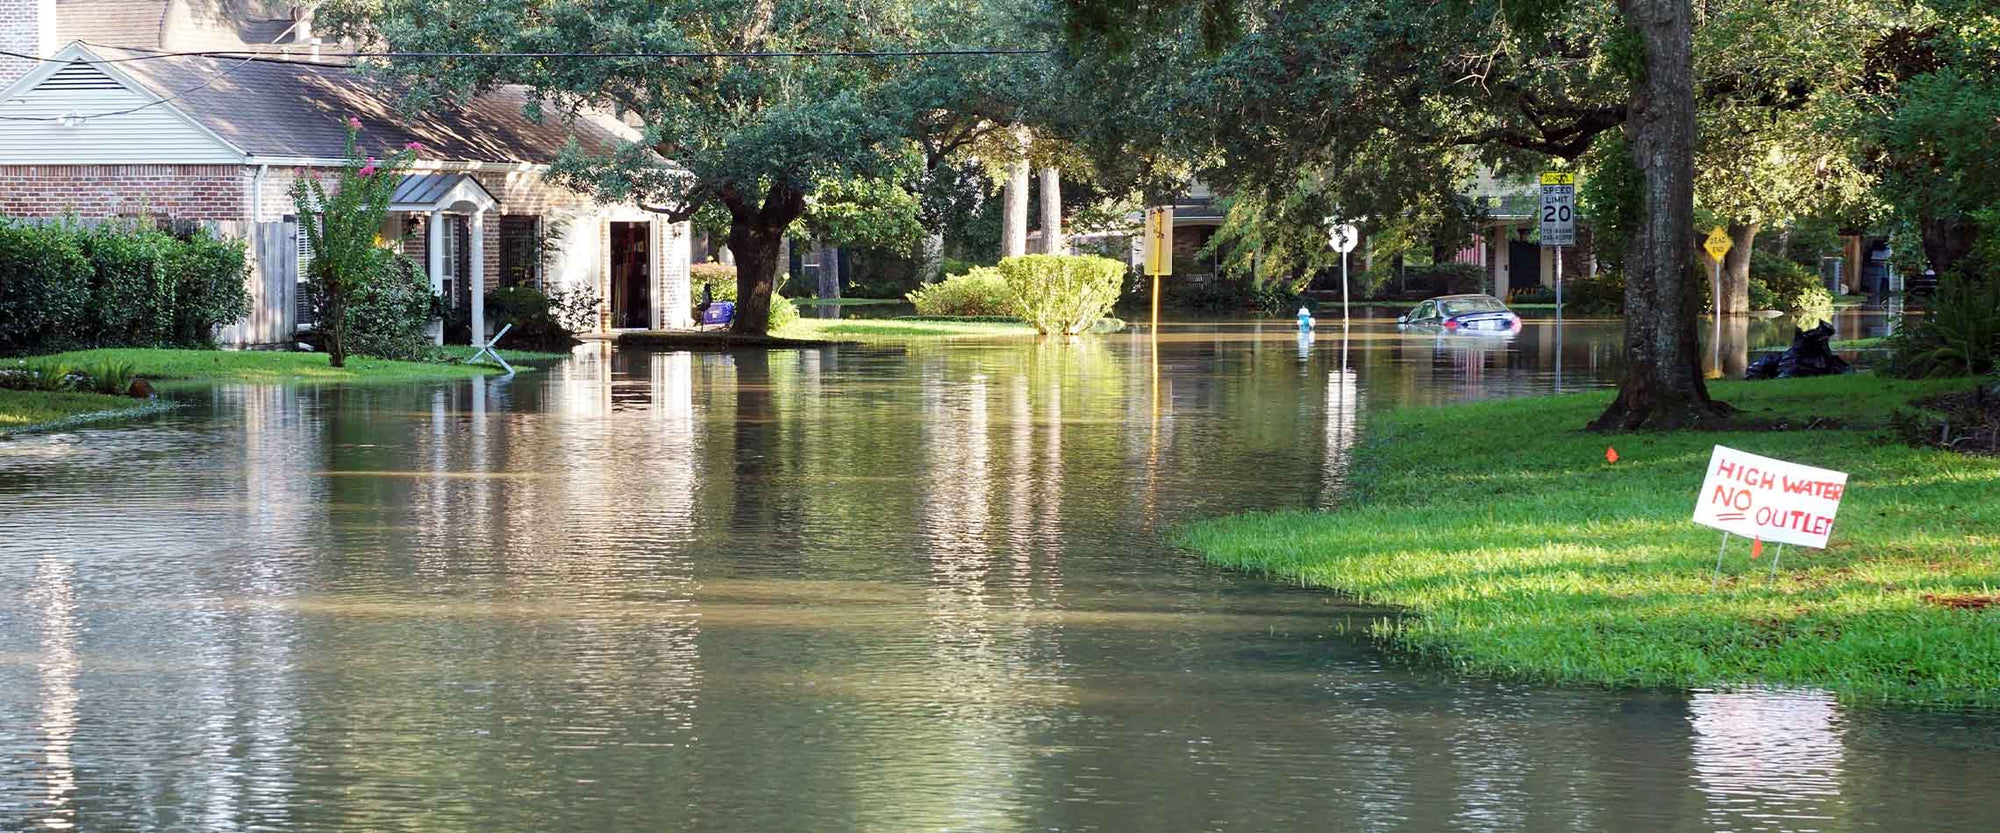 Flooded street in Texas